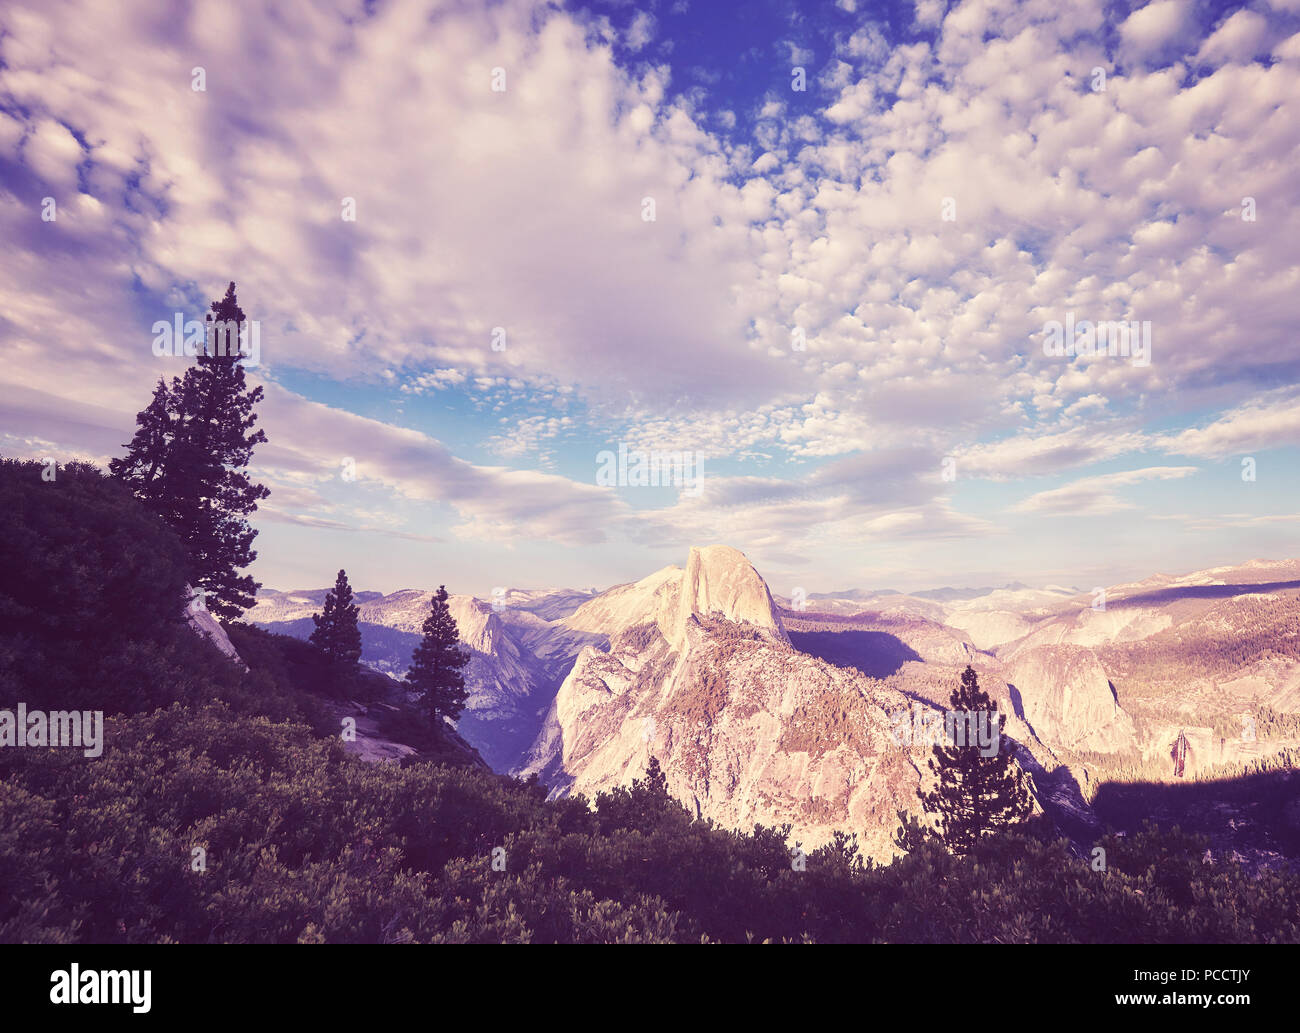 Vintage stylized picture of the Yosemite National Park at sunset, California, USA. Stock Photo